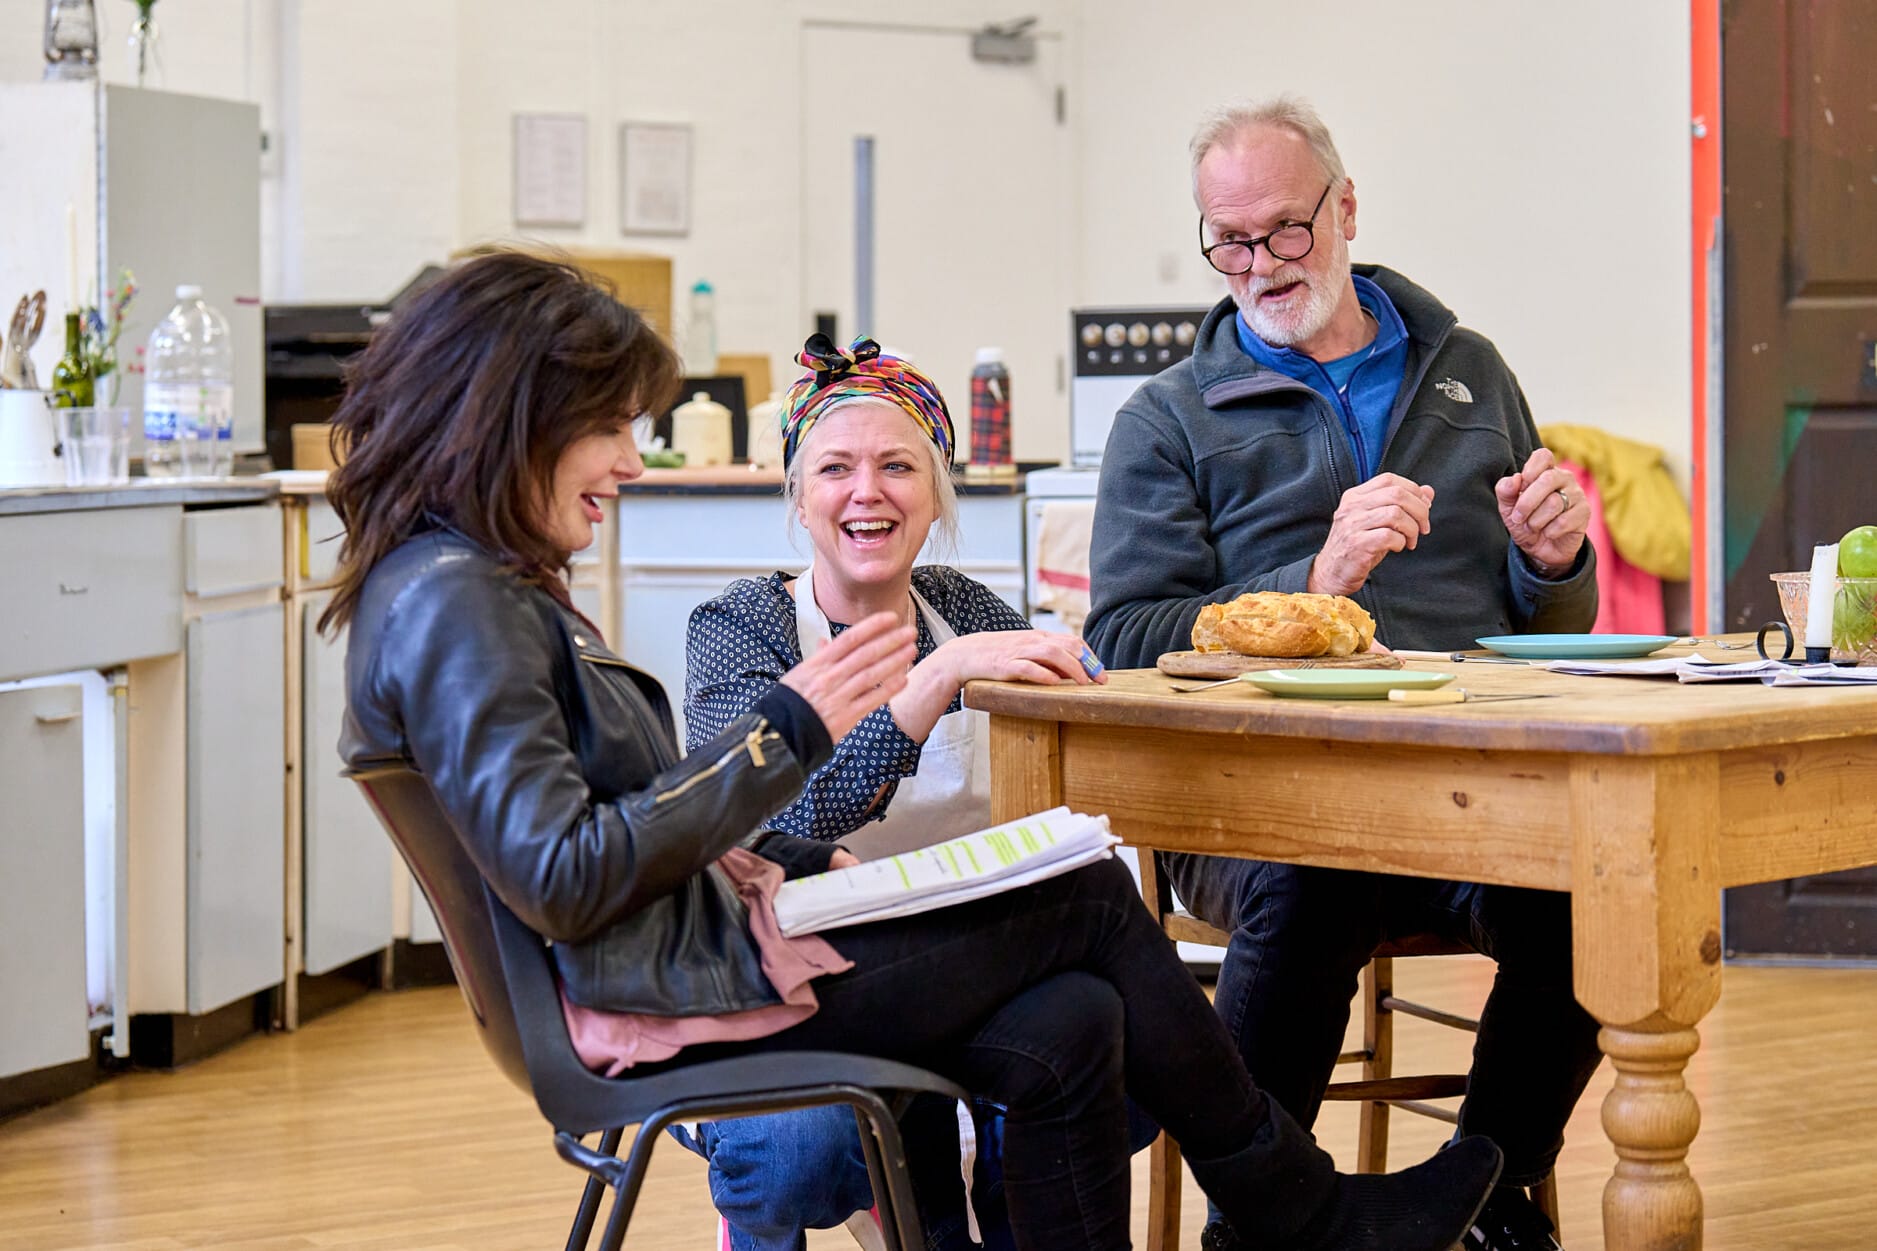 Sally Dexter, Caroline Harker and Clive Mantle in rehearsal for The Children. Photo by Manuel Harlan.